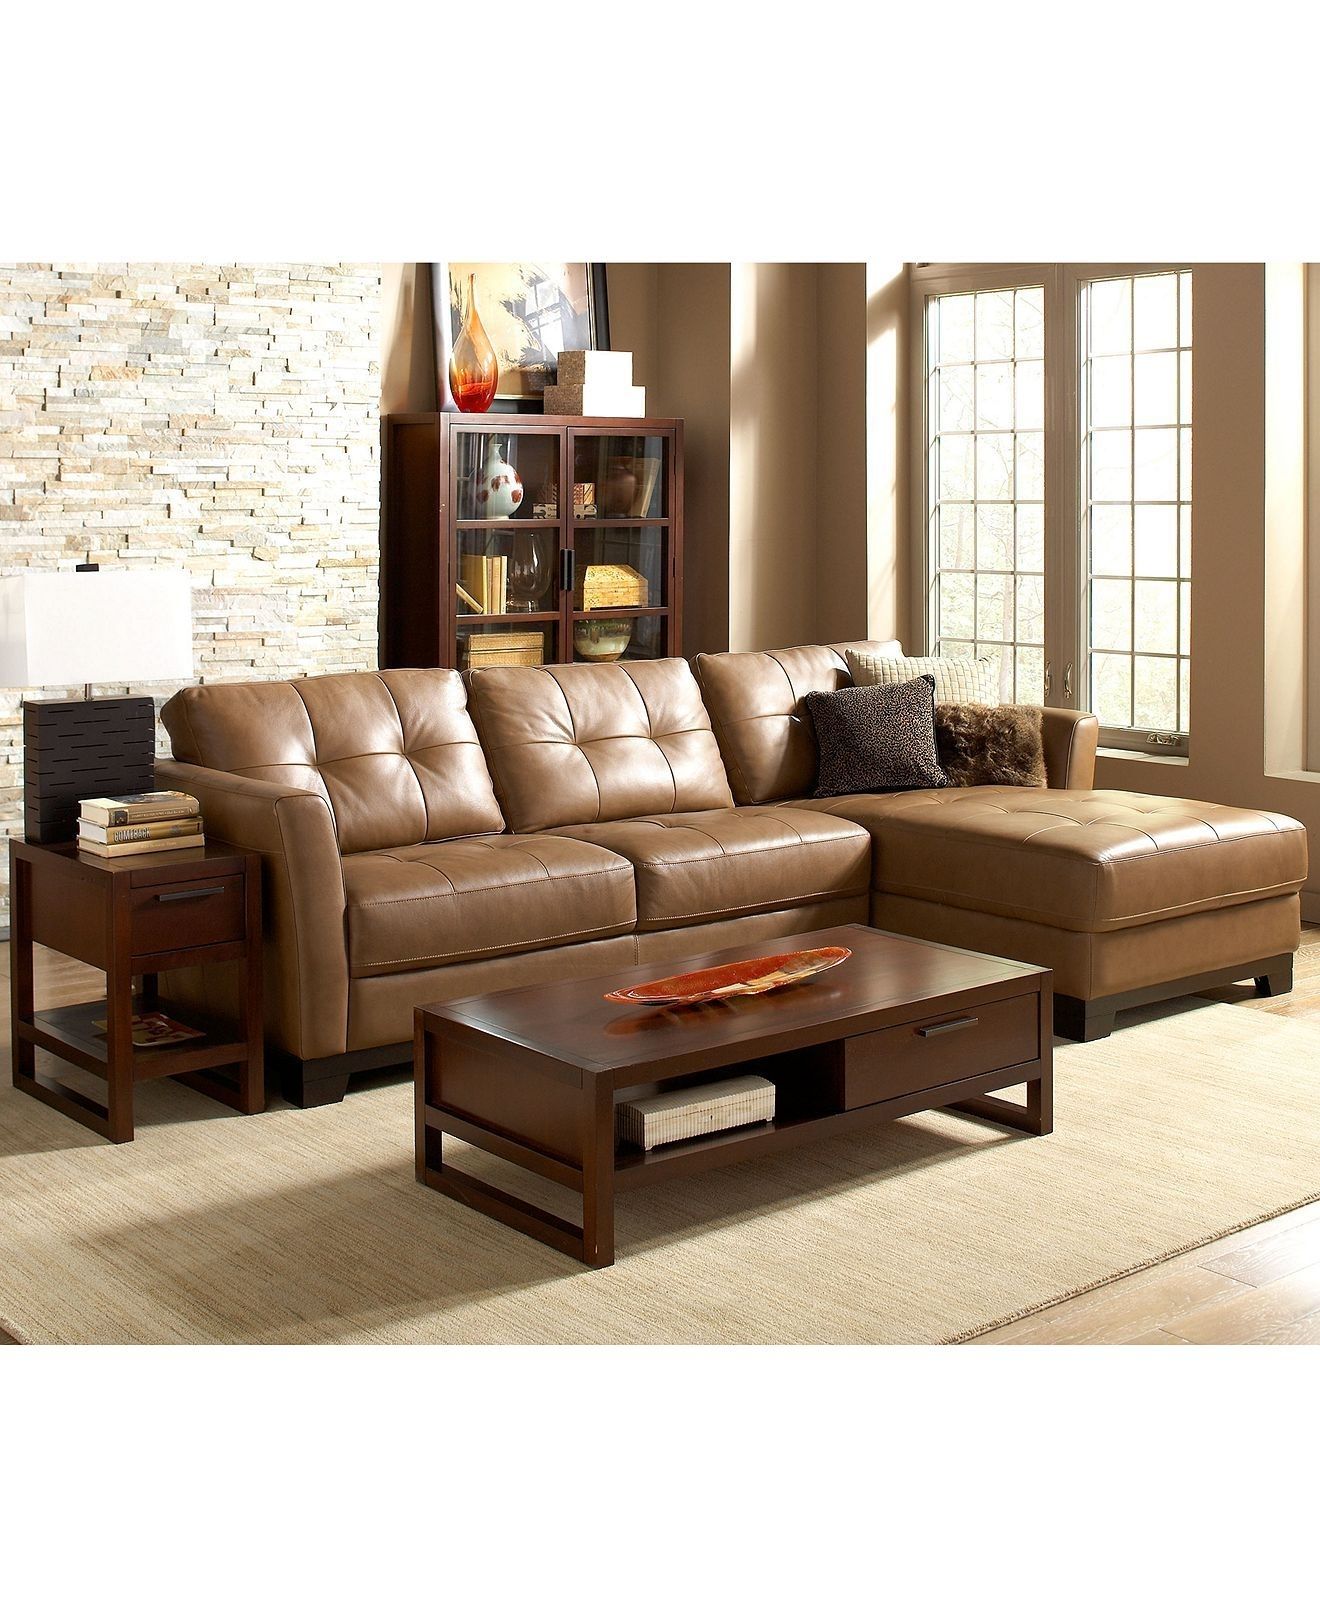 Martino Leather Sectional Living Room Furniture Sets & Pieces Within Economax Sectional Sofas (View 4 of 10)